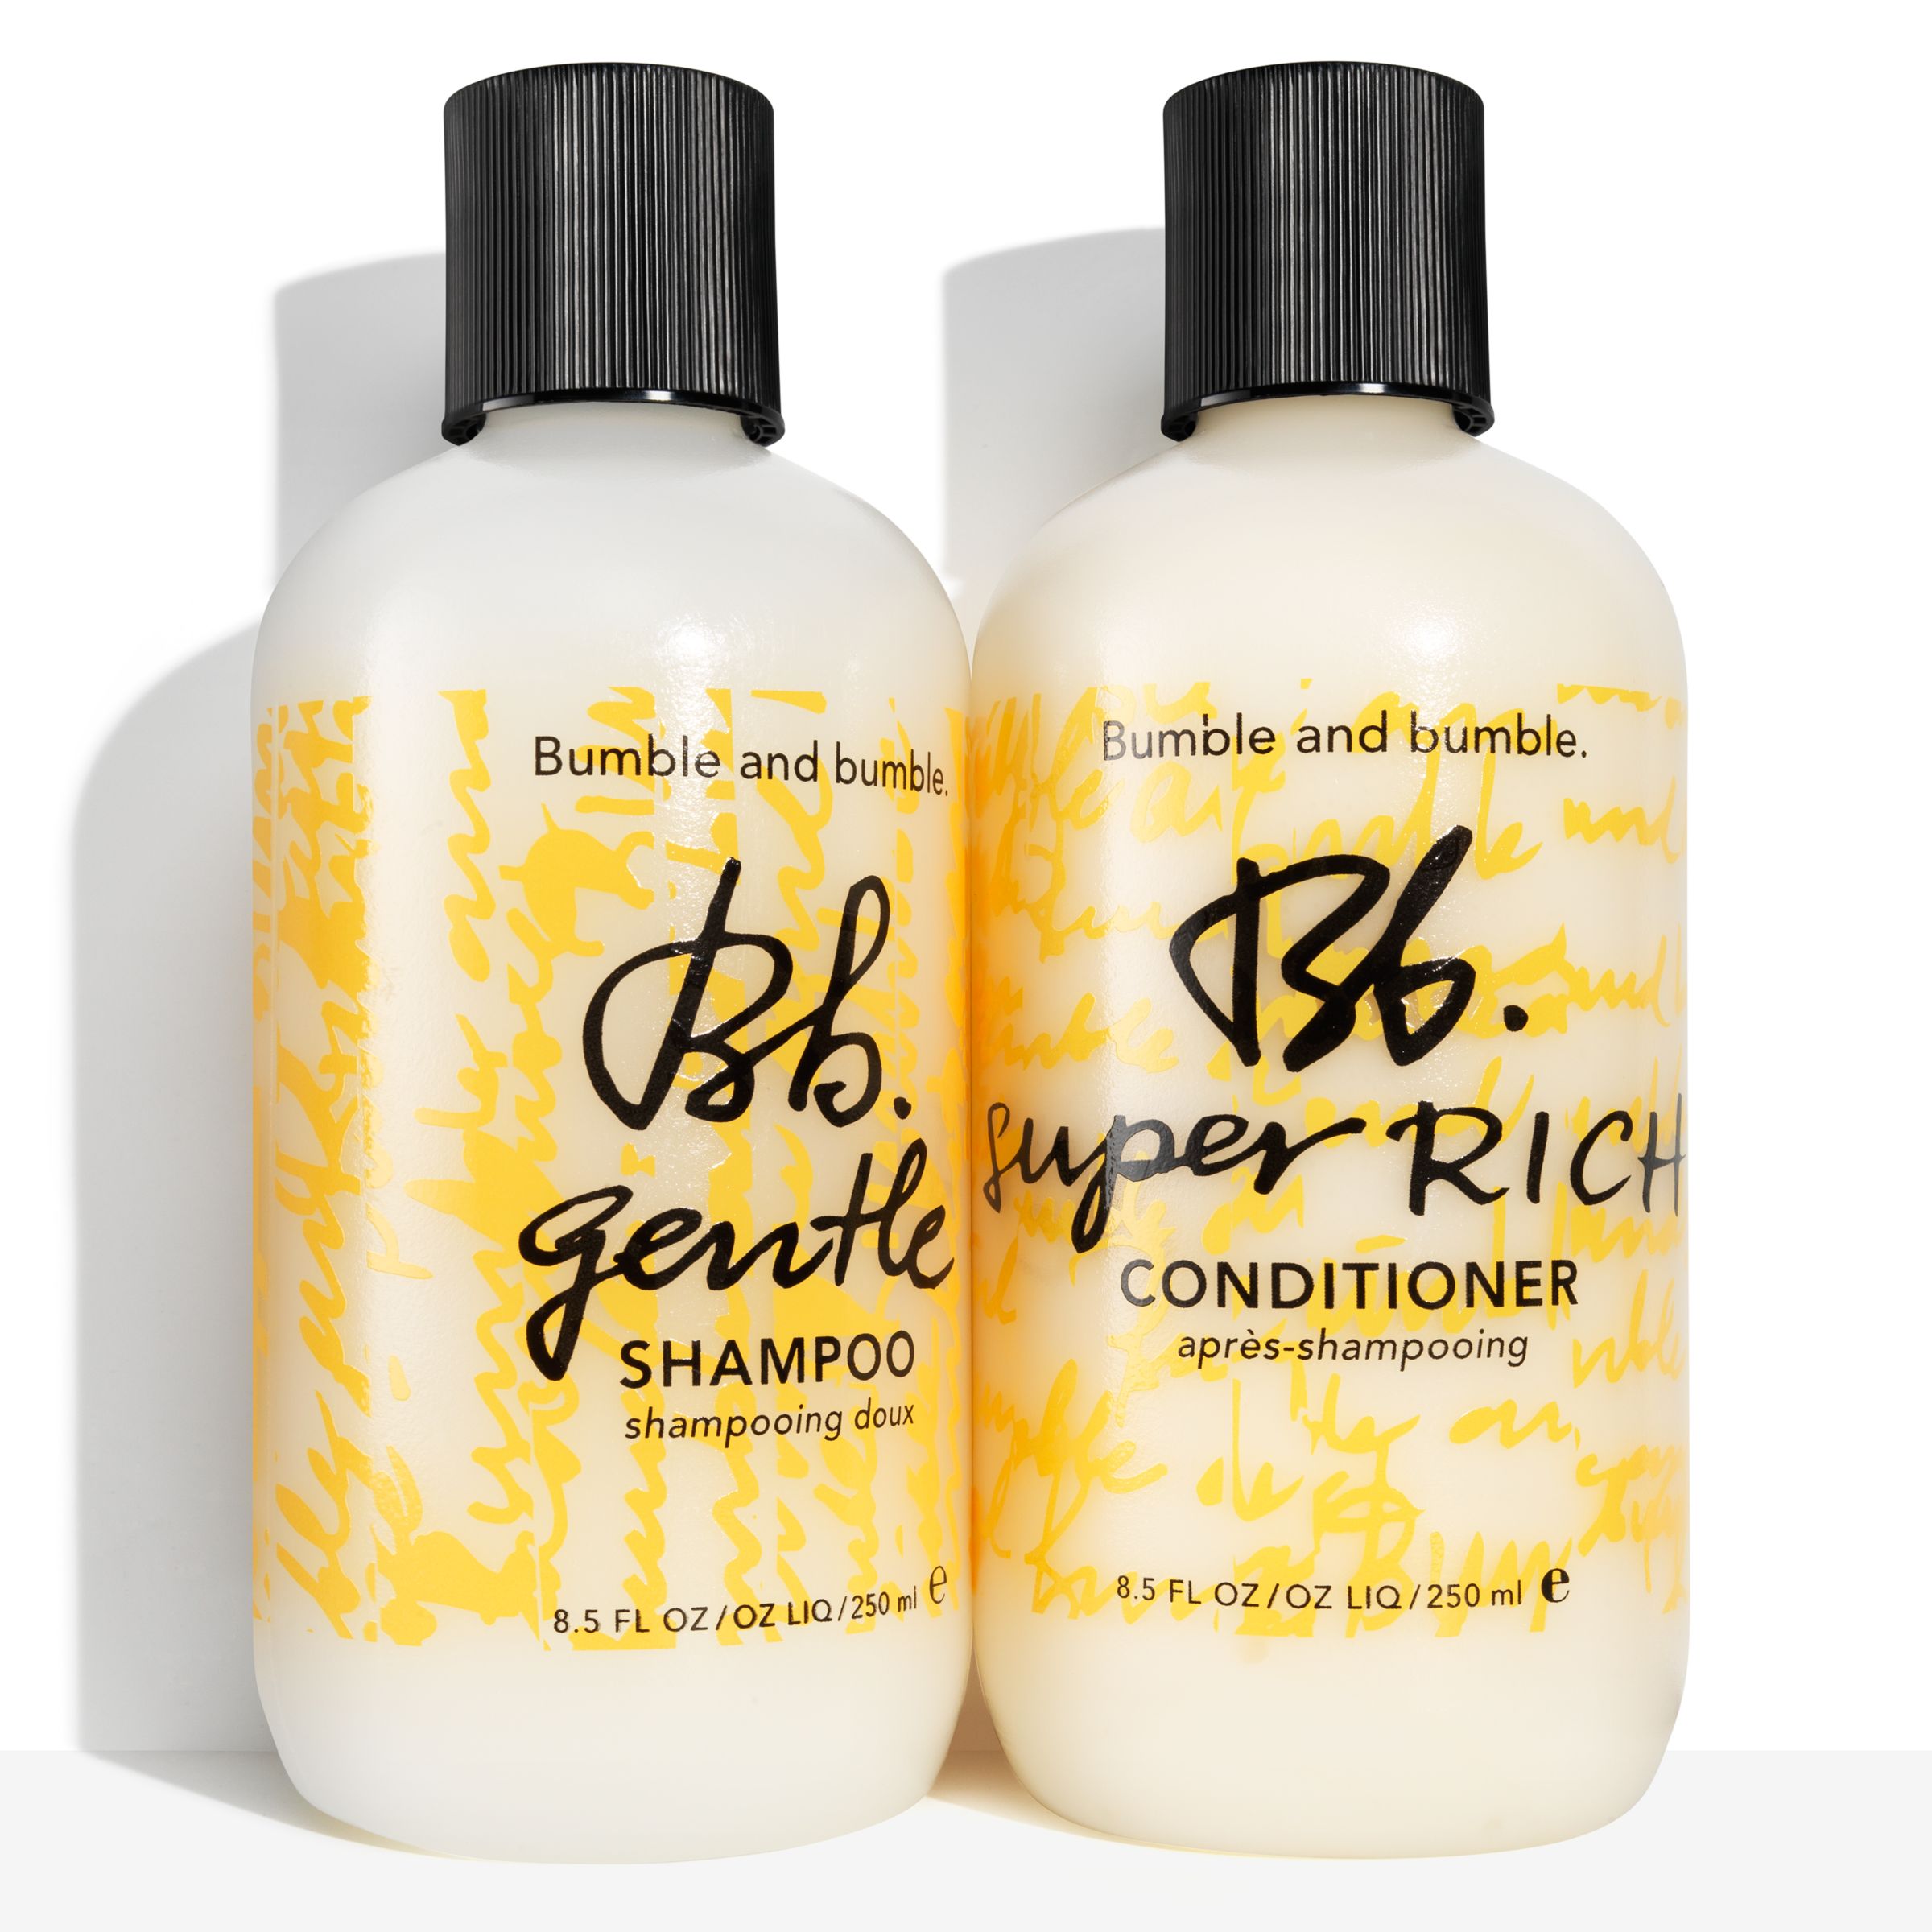 Bumble and bumble Gentle Shampoo, 250ml 2